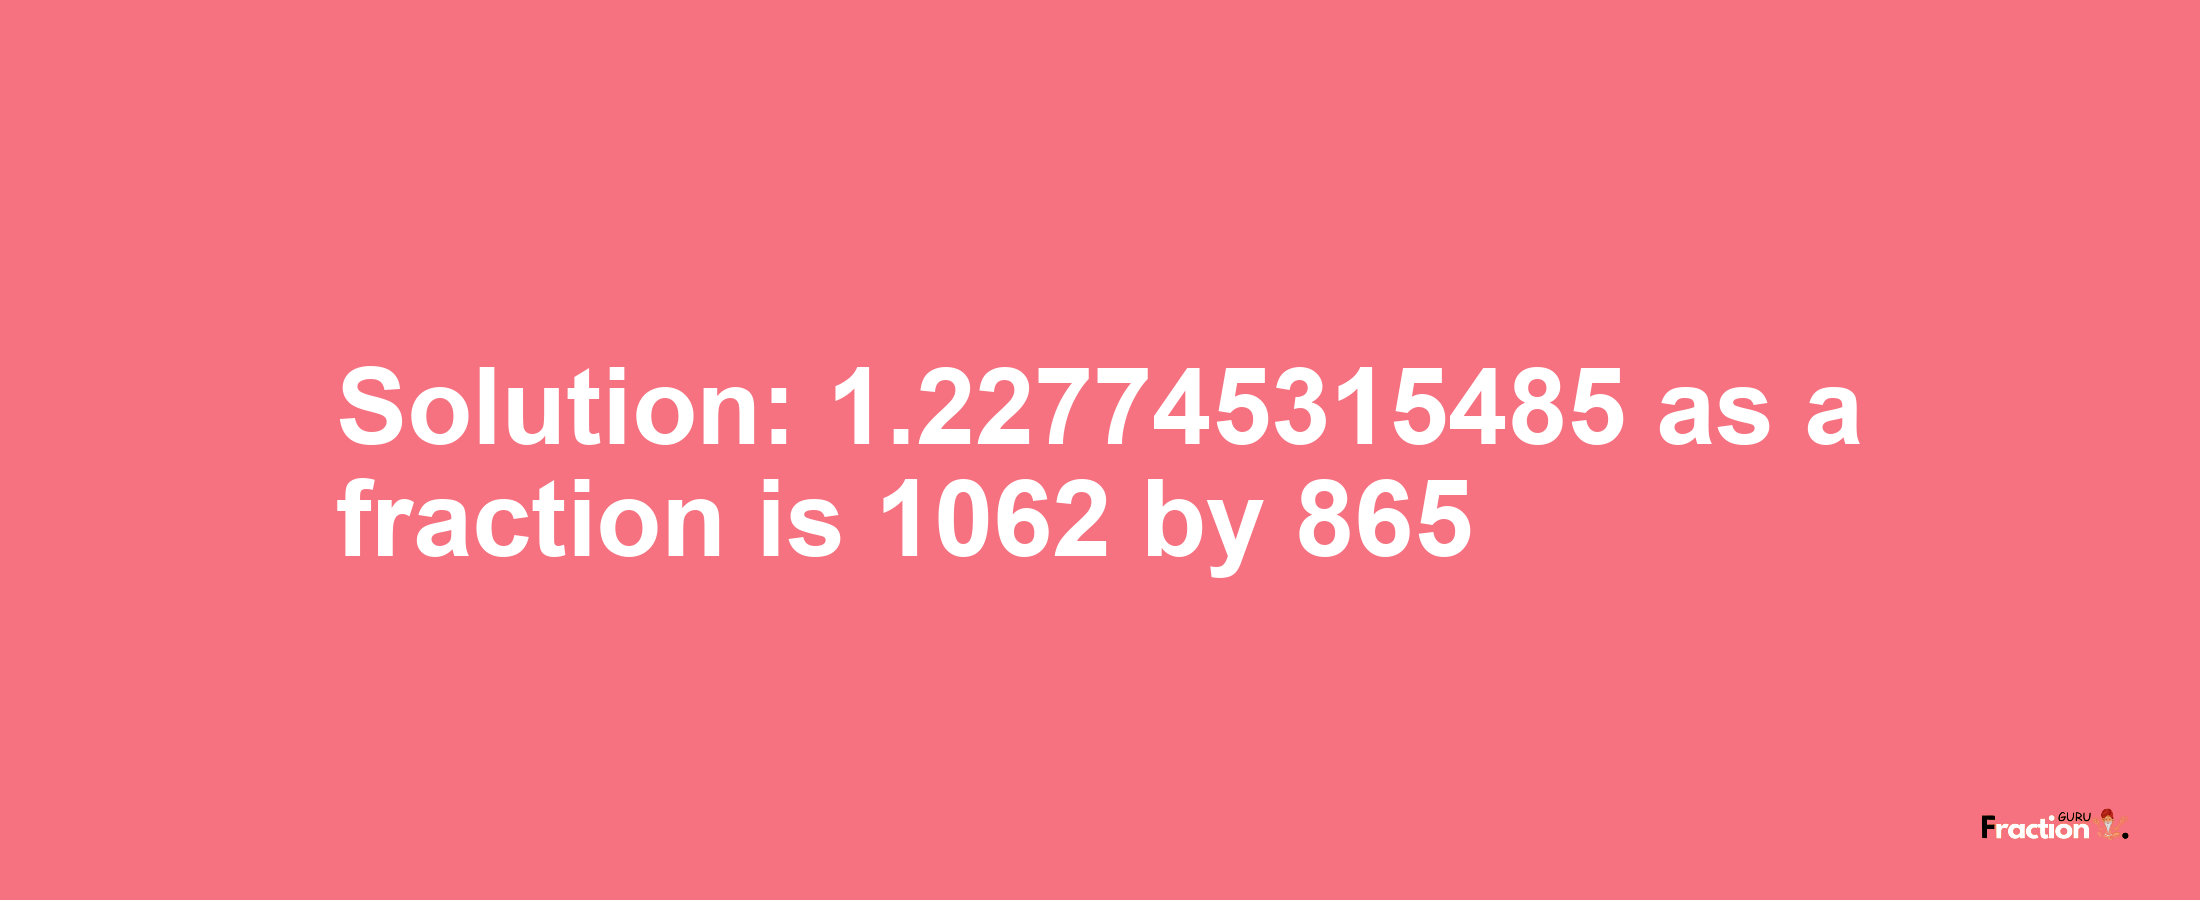 Solution:1.227745315485 as a fraction is 1062/865